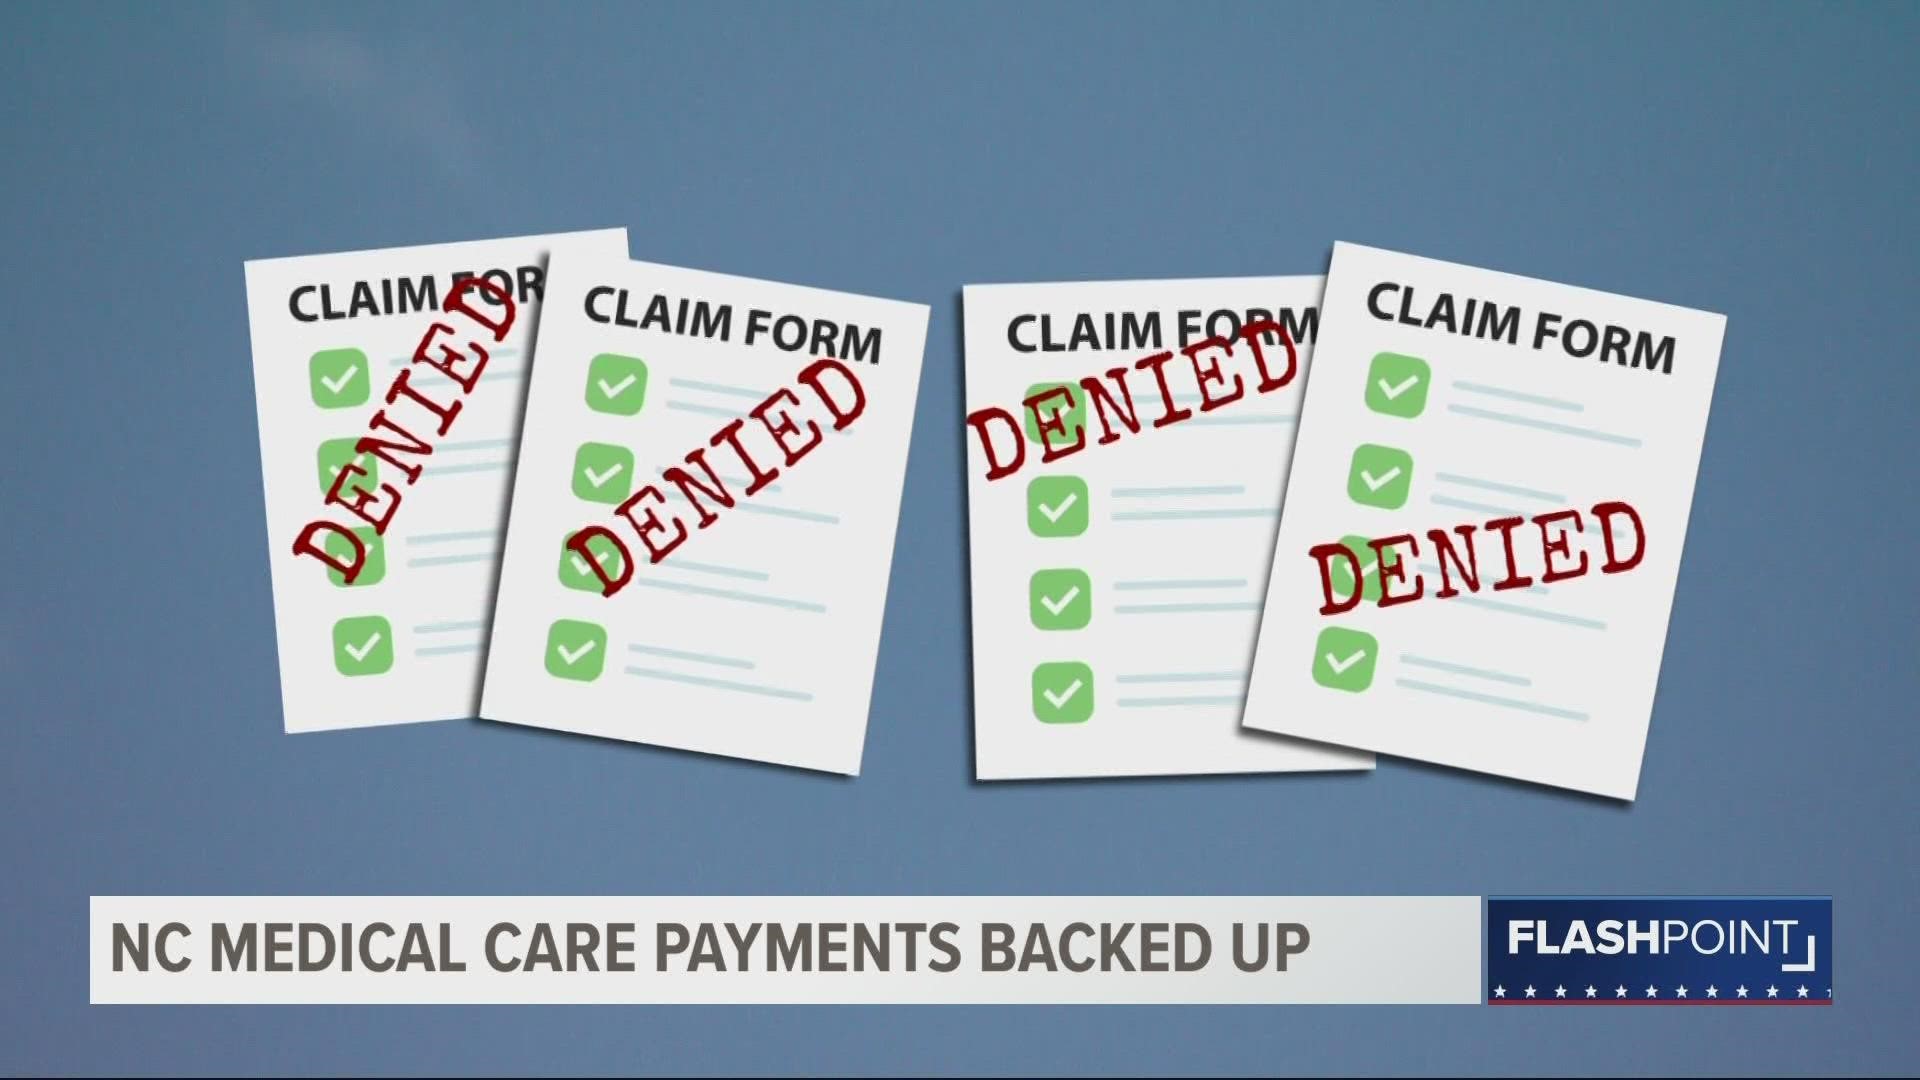 Experts tell us technical issues have to the denial of 12% of claims filed.